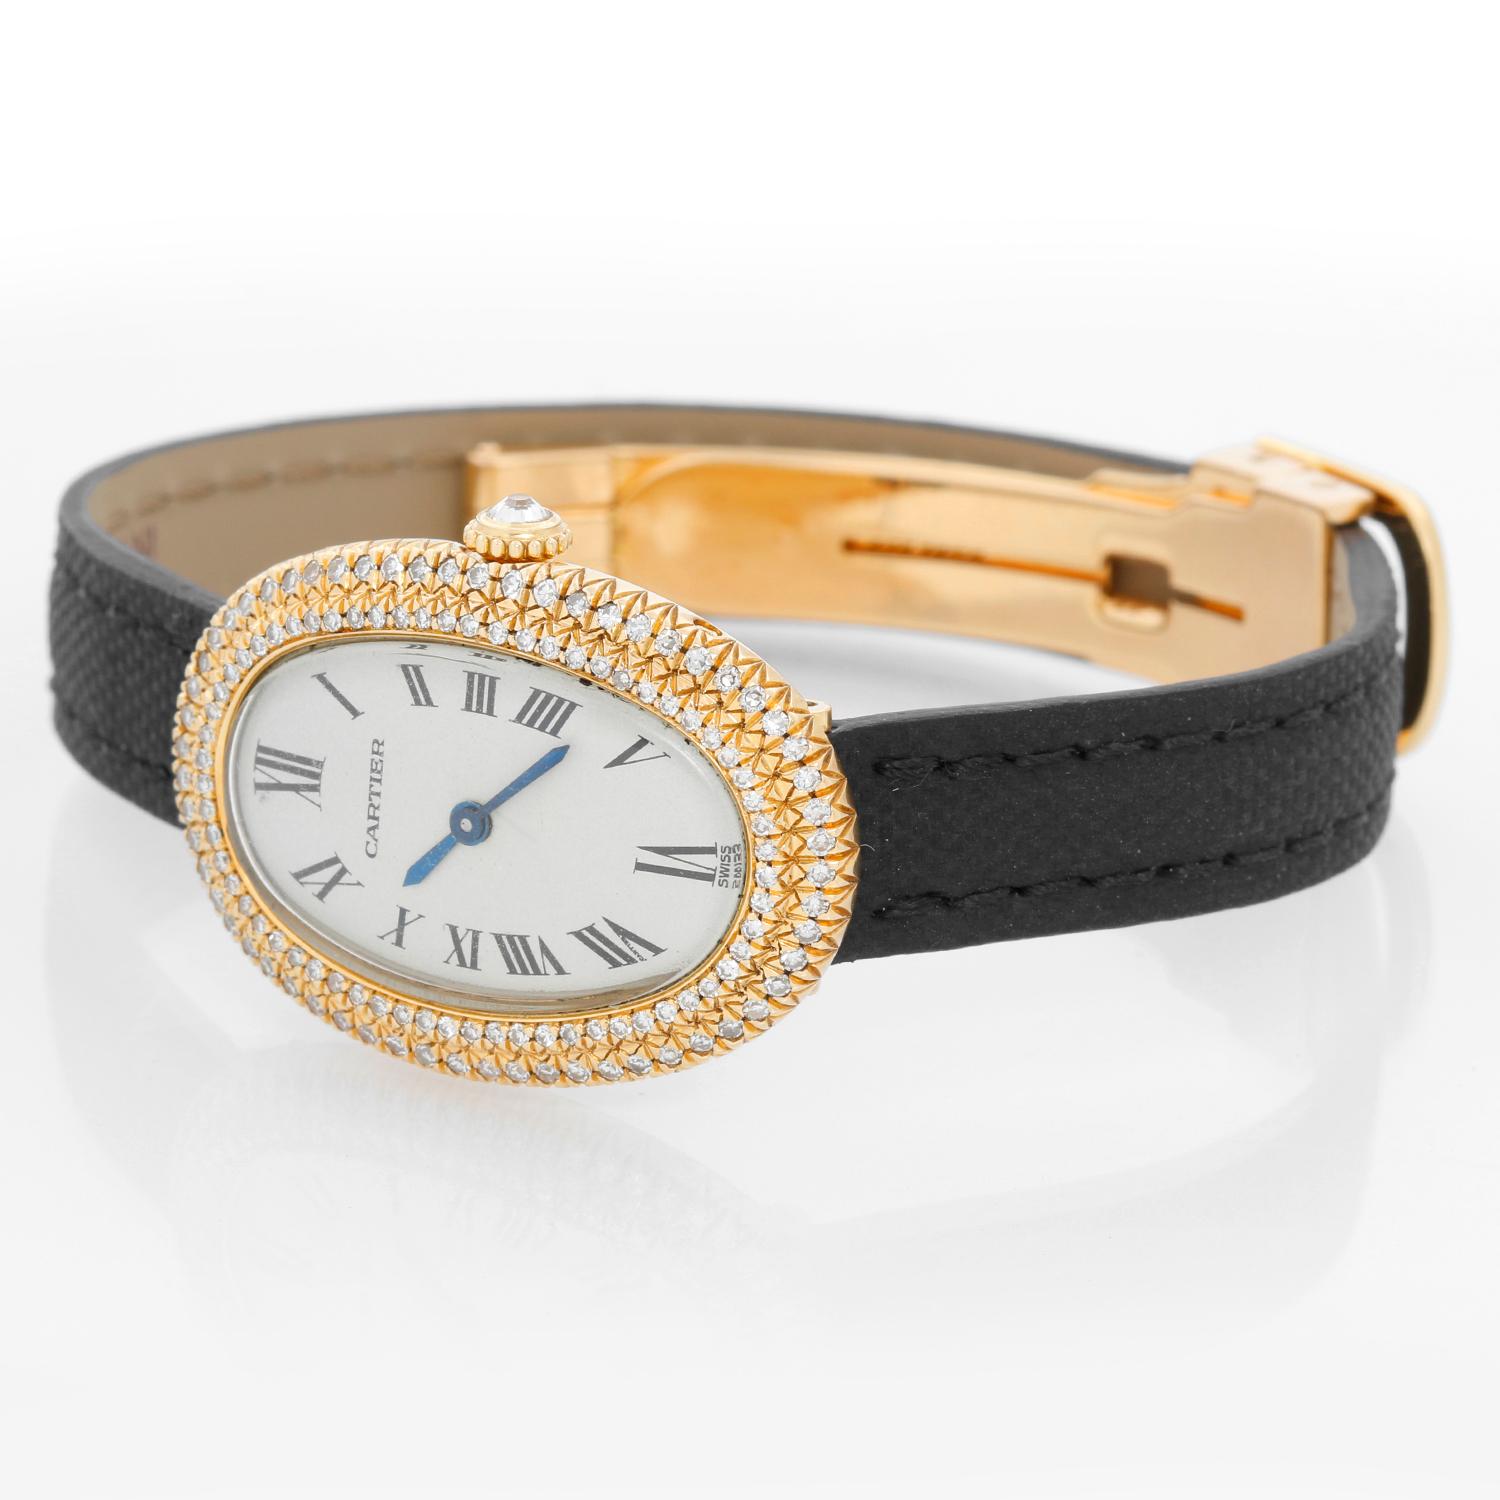 Cartier Baignoire 18K Yellow Gold Watch - Manual winding. 18K Yellow gold with Cartier diamond bezel. Ivory dial with Roman numerals. New Black Cartier strap with yellow gold deployant clasp. Pre-owned with Cartier pouch.